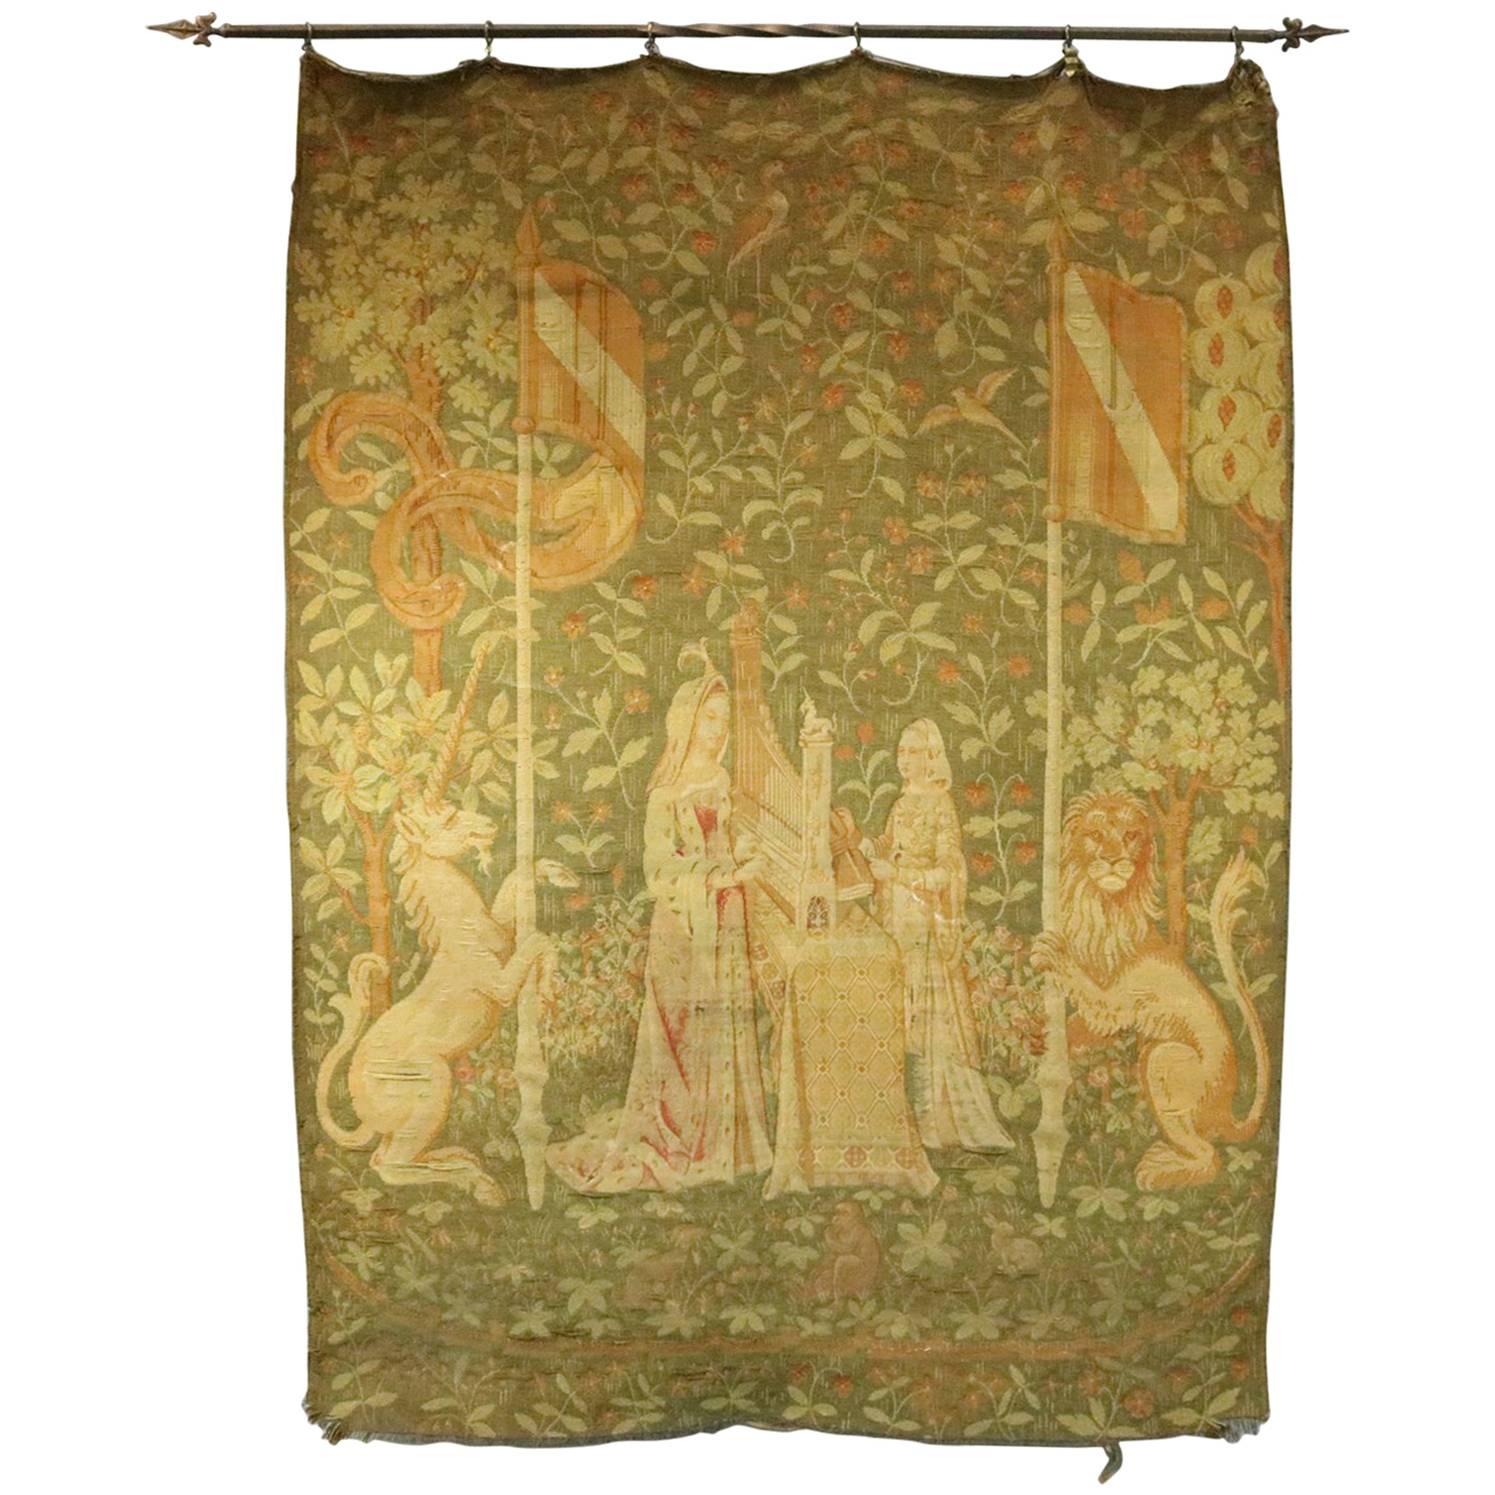 Antique Flemish Wool Wall Tapestry, The Lady & The Unicorn, circa 1800